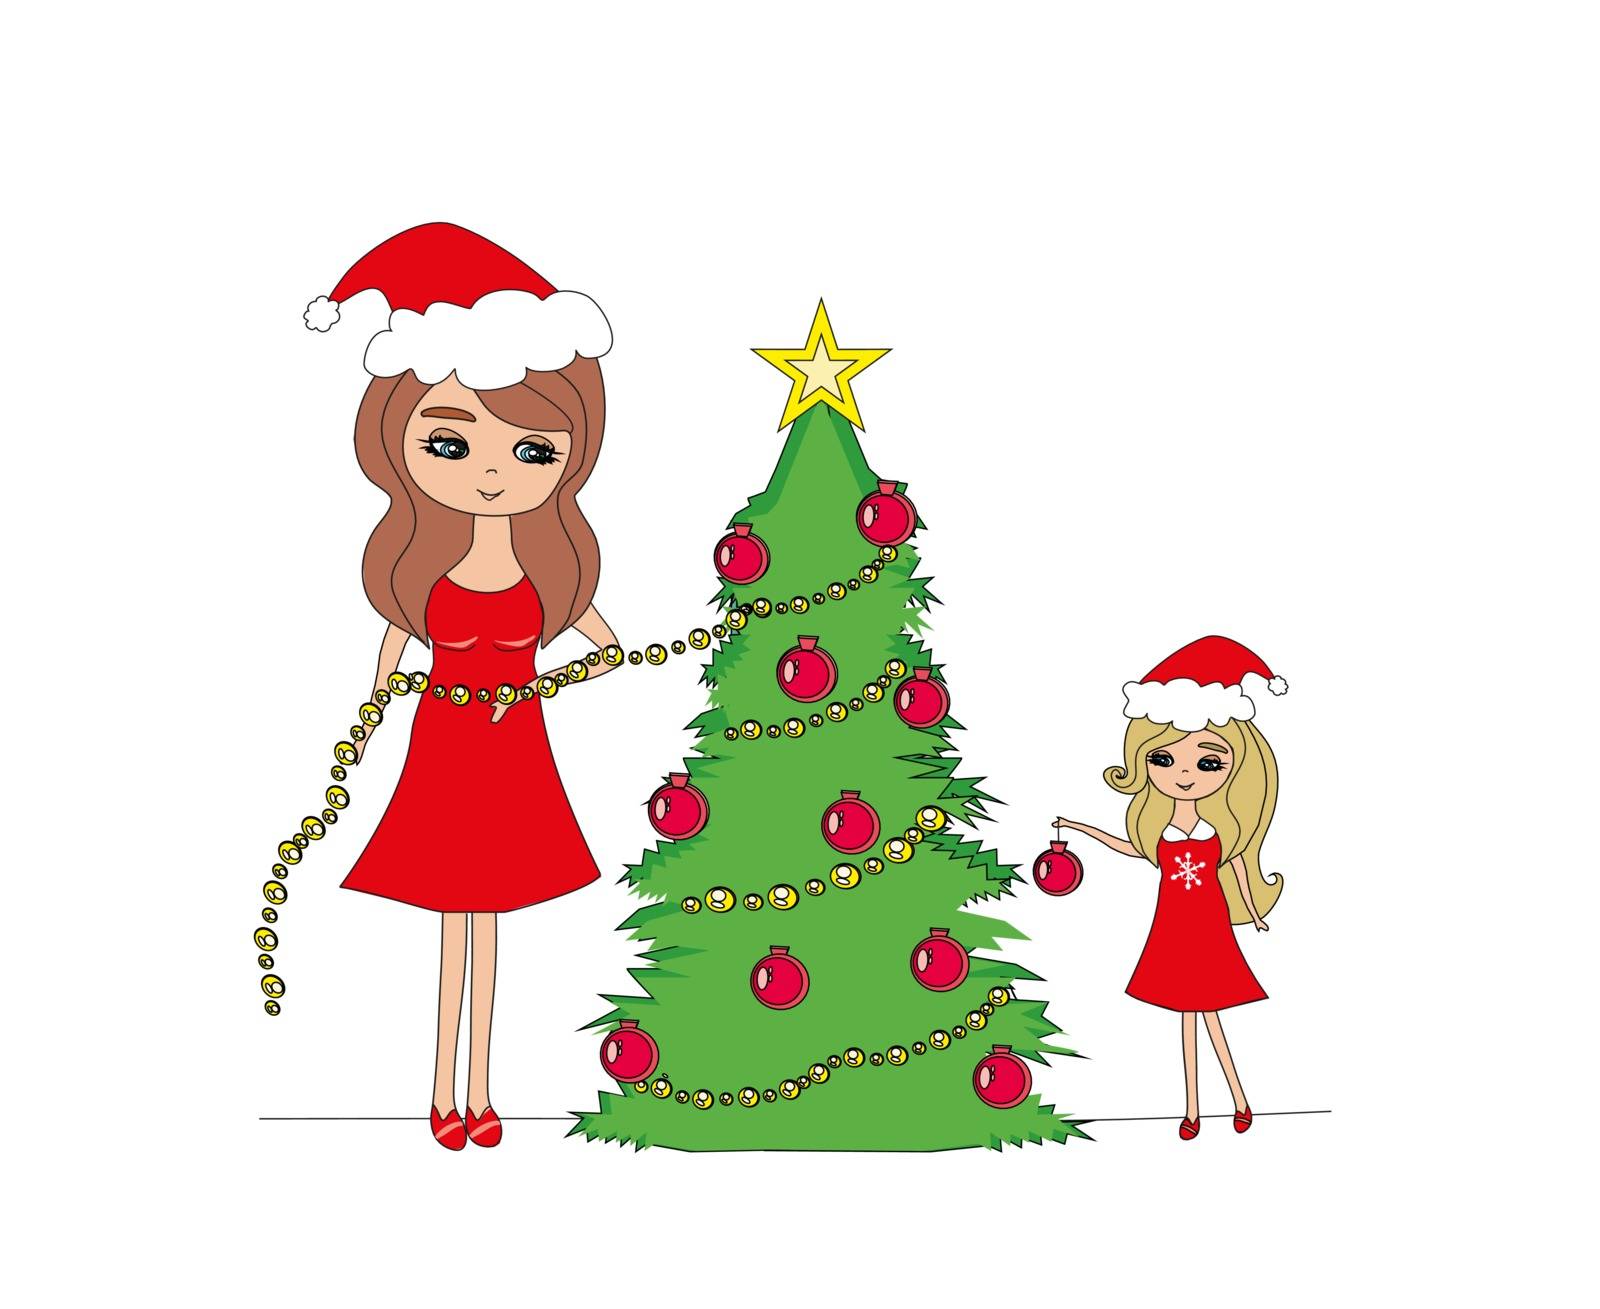 mother and daughter decorate the Christmas tree together